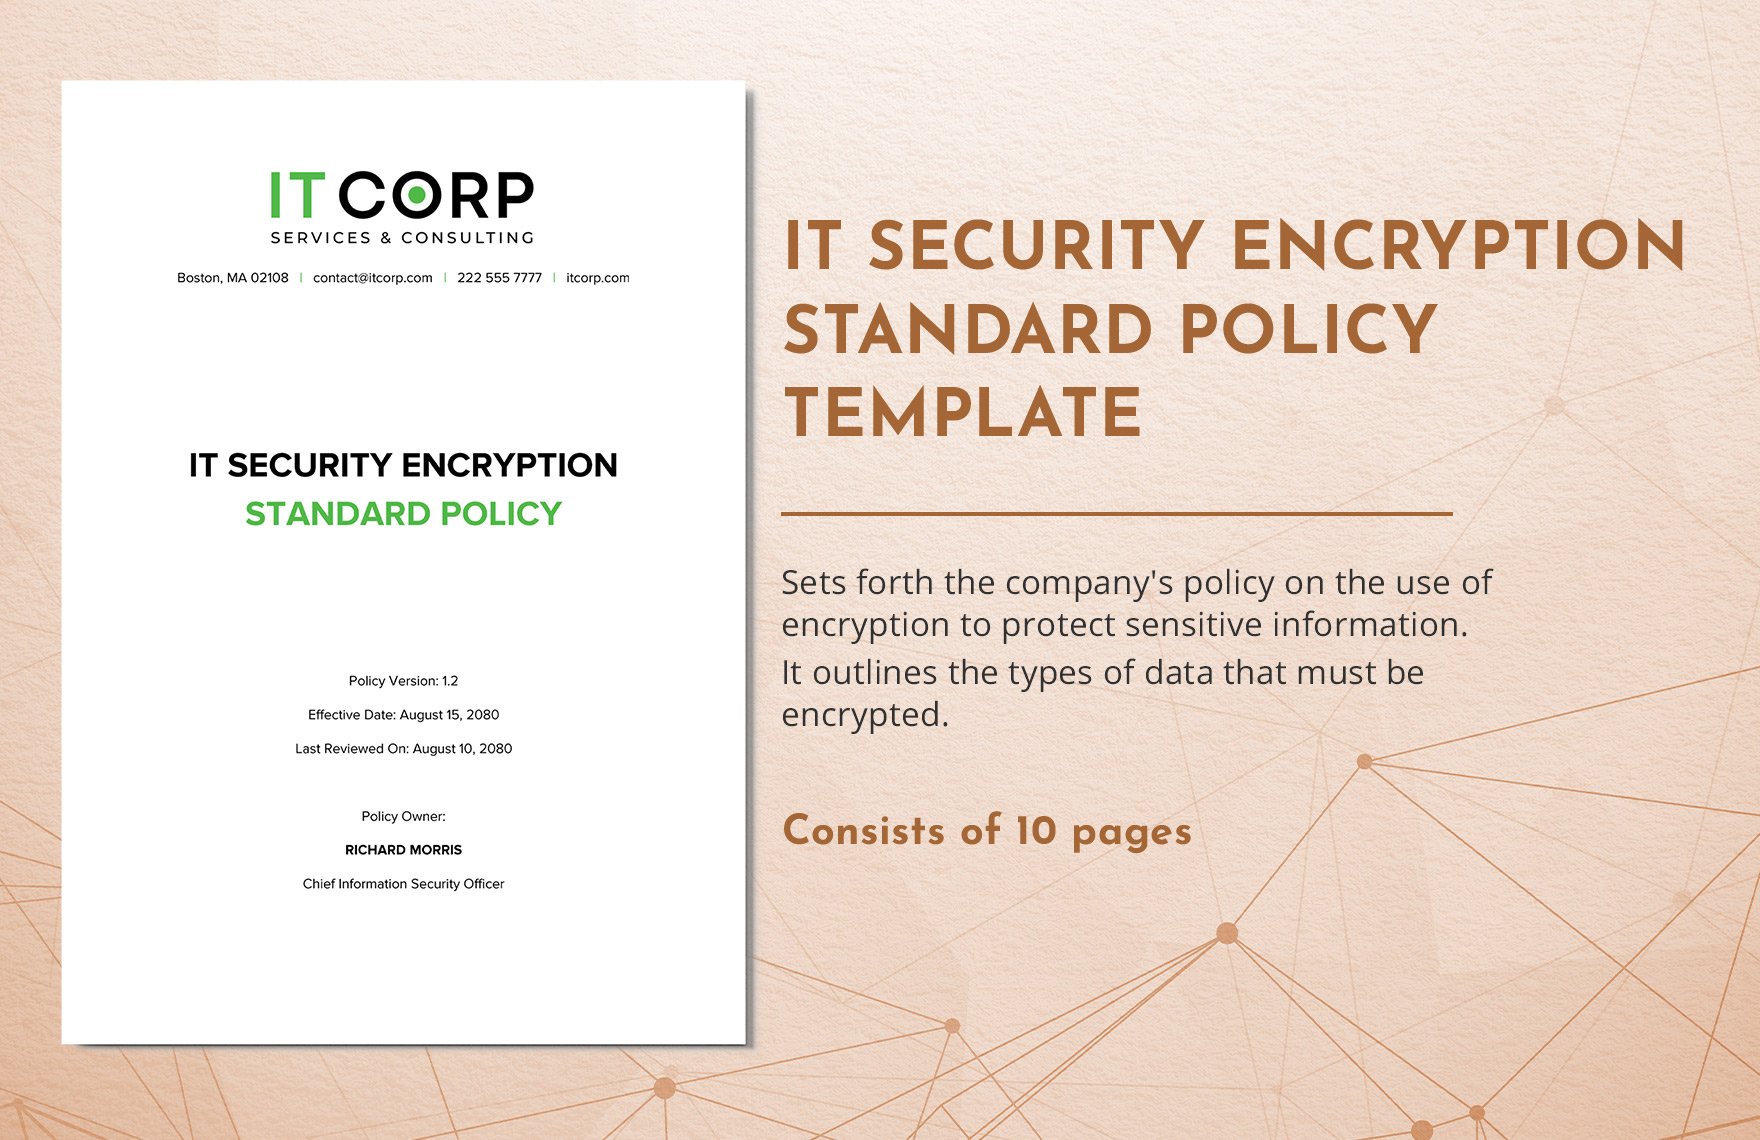 IT Security Encryption Standard Policy Template